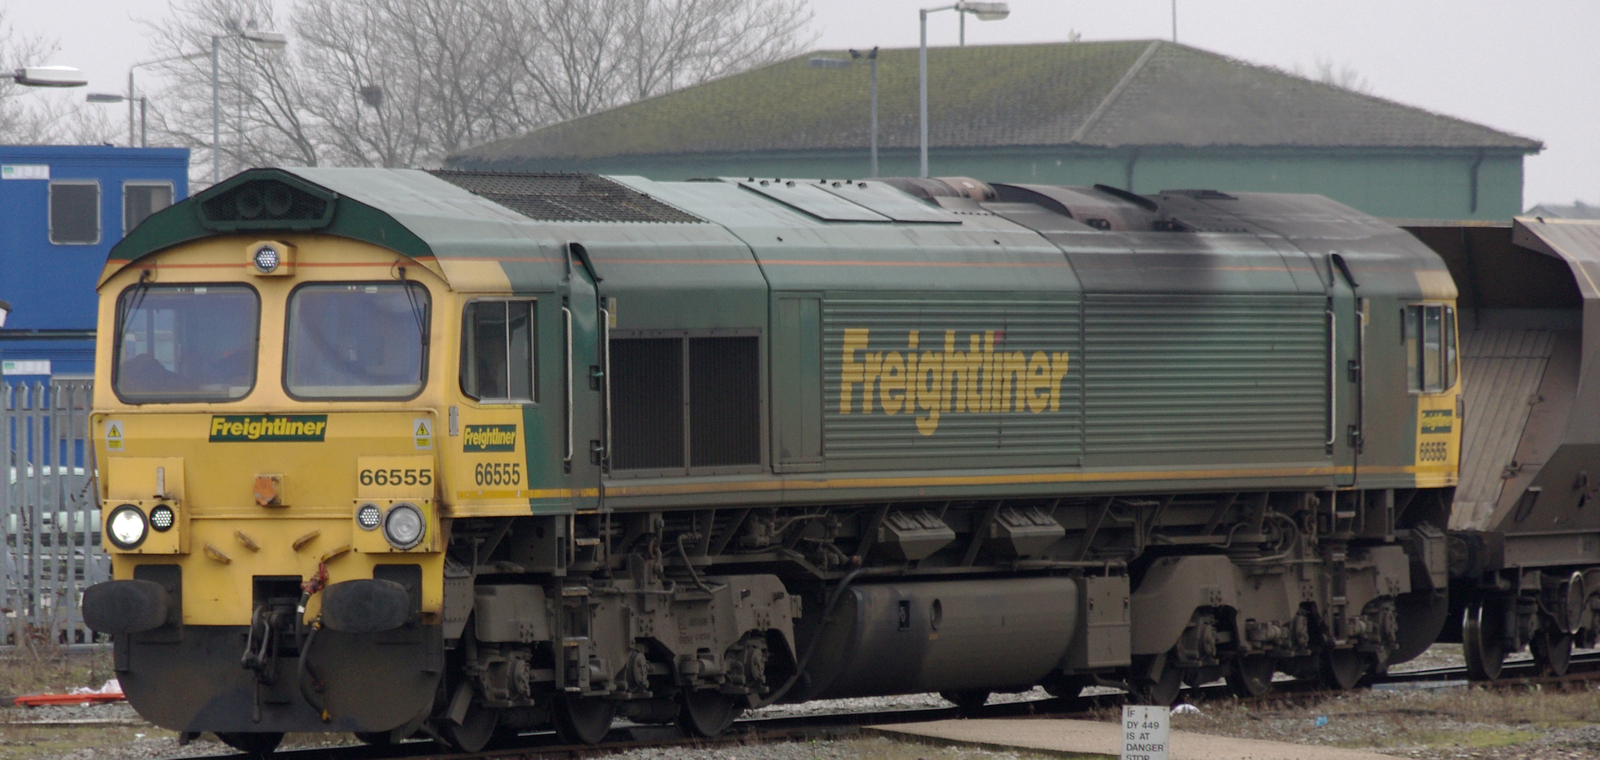 Freightliner 66555 in February 2011 at the Bombardier depot in Derby